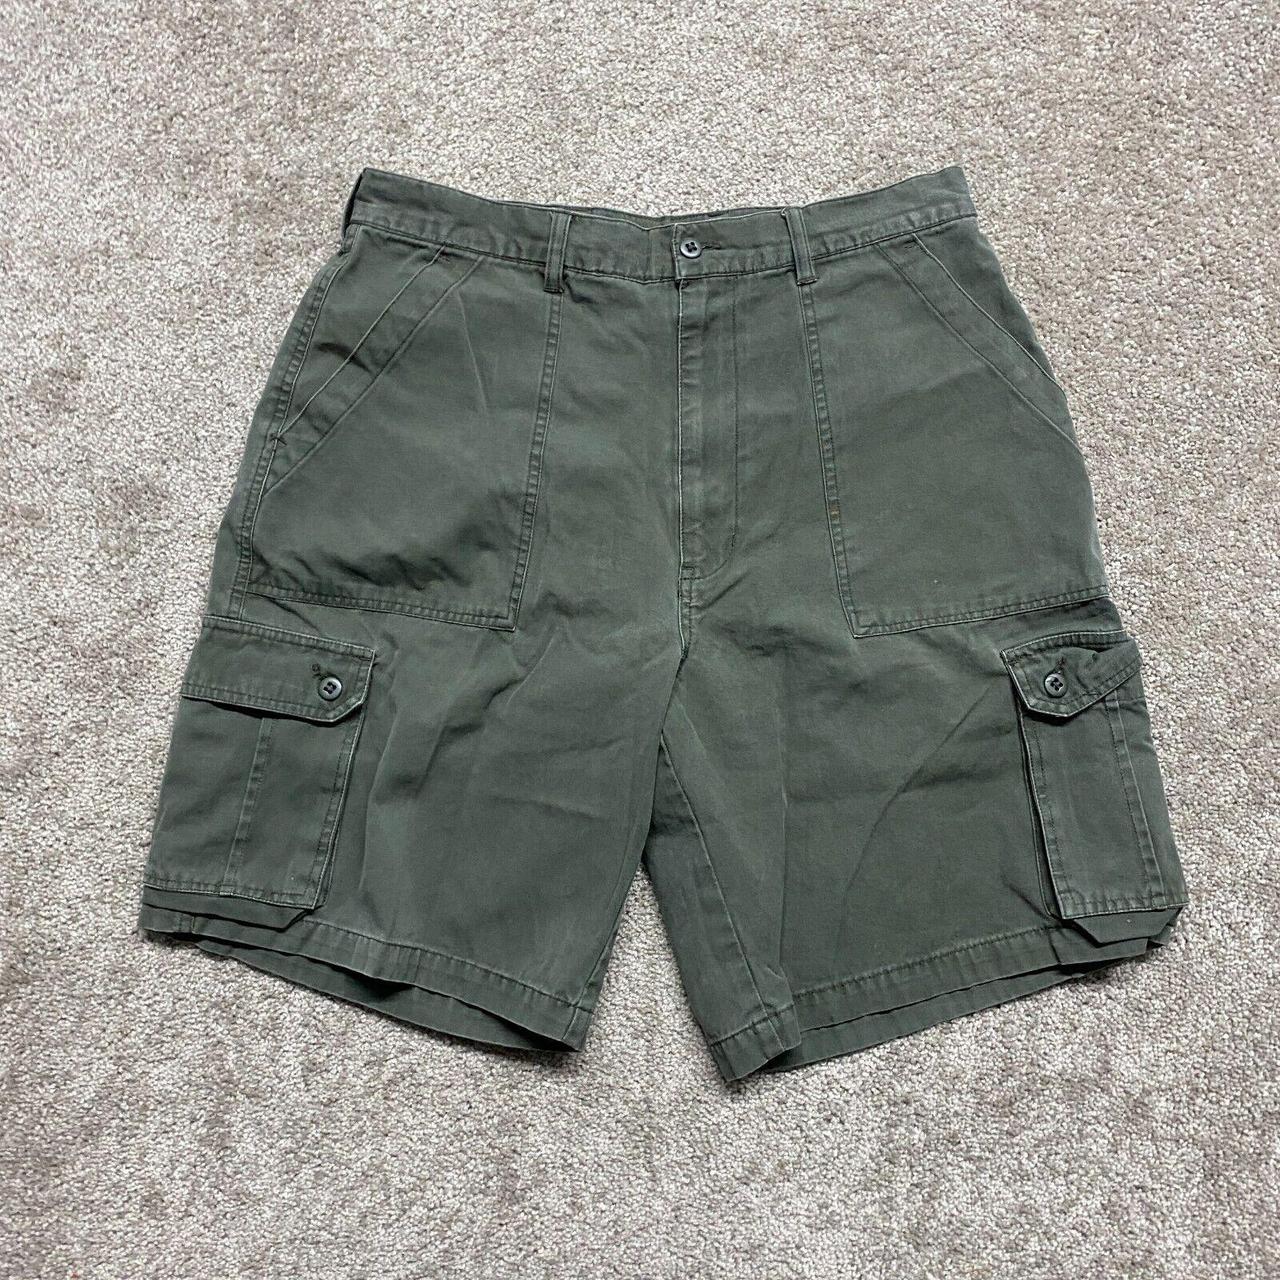 Utility Men's Brown and Green Shorts